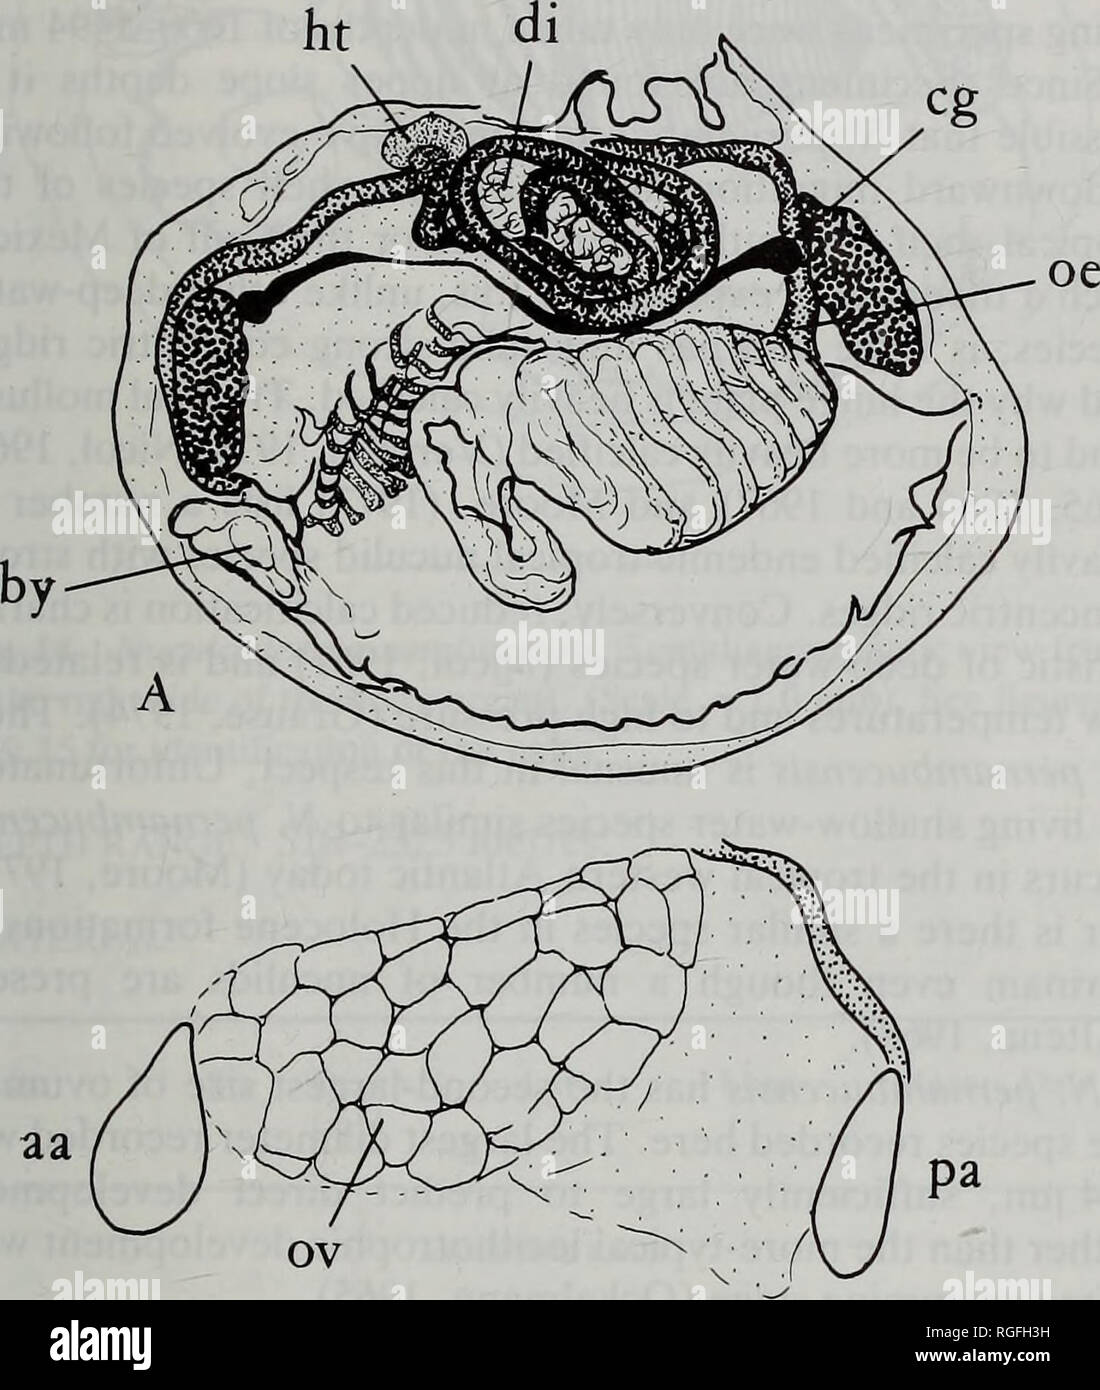 . Bulletin of the British Museum (Natural History) Zoology. . B Fig. 11 Nuculoidea bushae. A. Semidiagrammatic view from the right side of the body organs; B. Lateral view of part of body from the left side to show the position of the ovary in a mature specimen; C. Course of hind gut as seen from the right side. (Scale =1.0 mm; for key to abbreviations see p.63). Nuculoidea pernambucensis (Smith 1885) Figs 12-14 Type locality: Challenger Sta. 120, Lat. 08°37'00&quot;S, Long. 34°28'00&quot;W, 675 fms. Type specimens: Syntypes, 5 valves, BM(NH) reg.no. 1887.2.9.2910-11. (Examined by PR). (Note:  Stock Photo